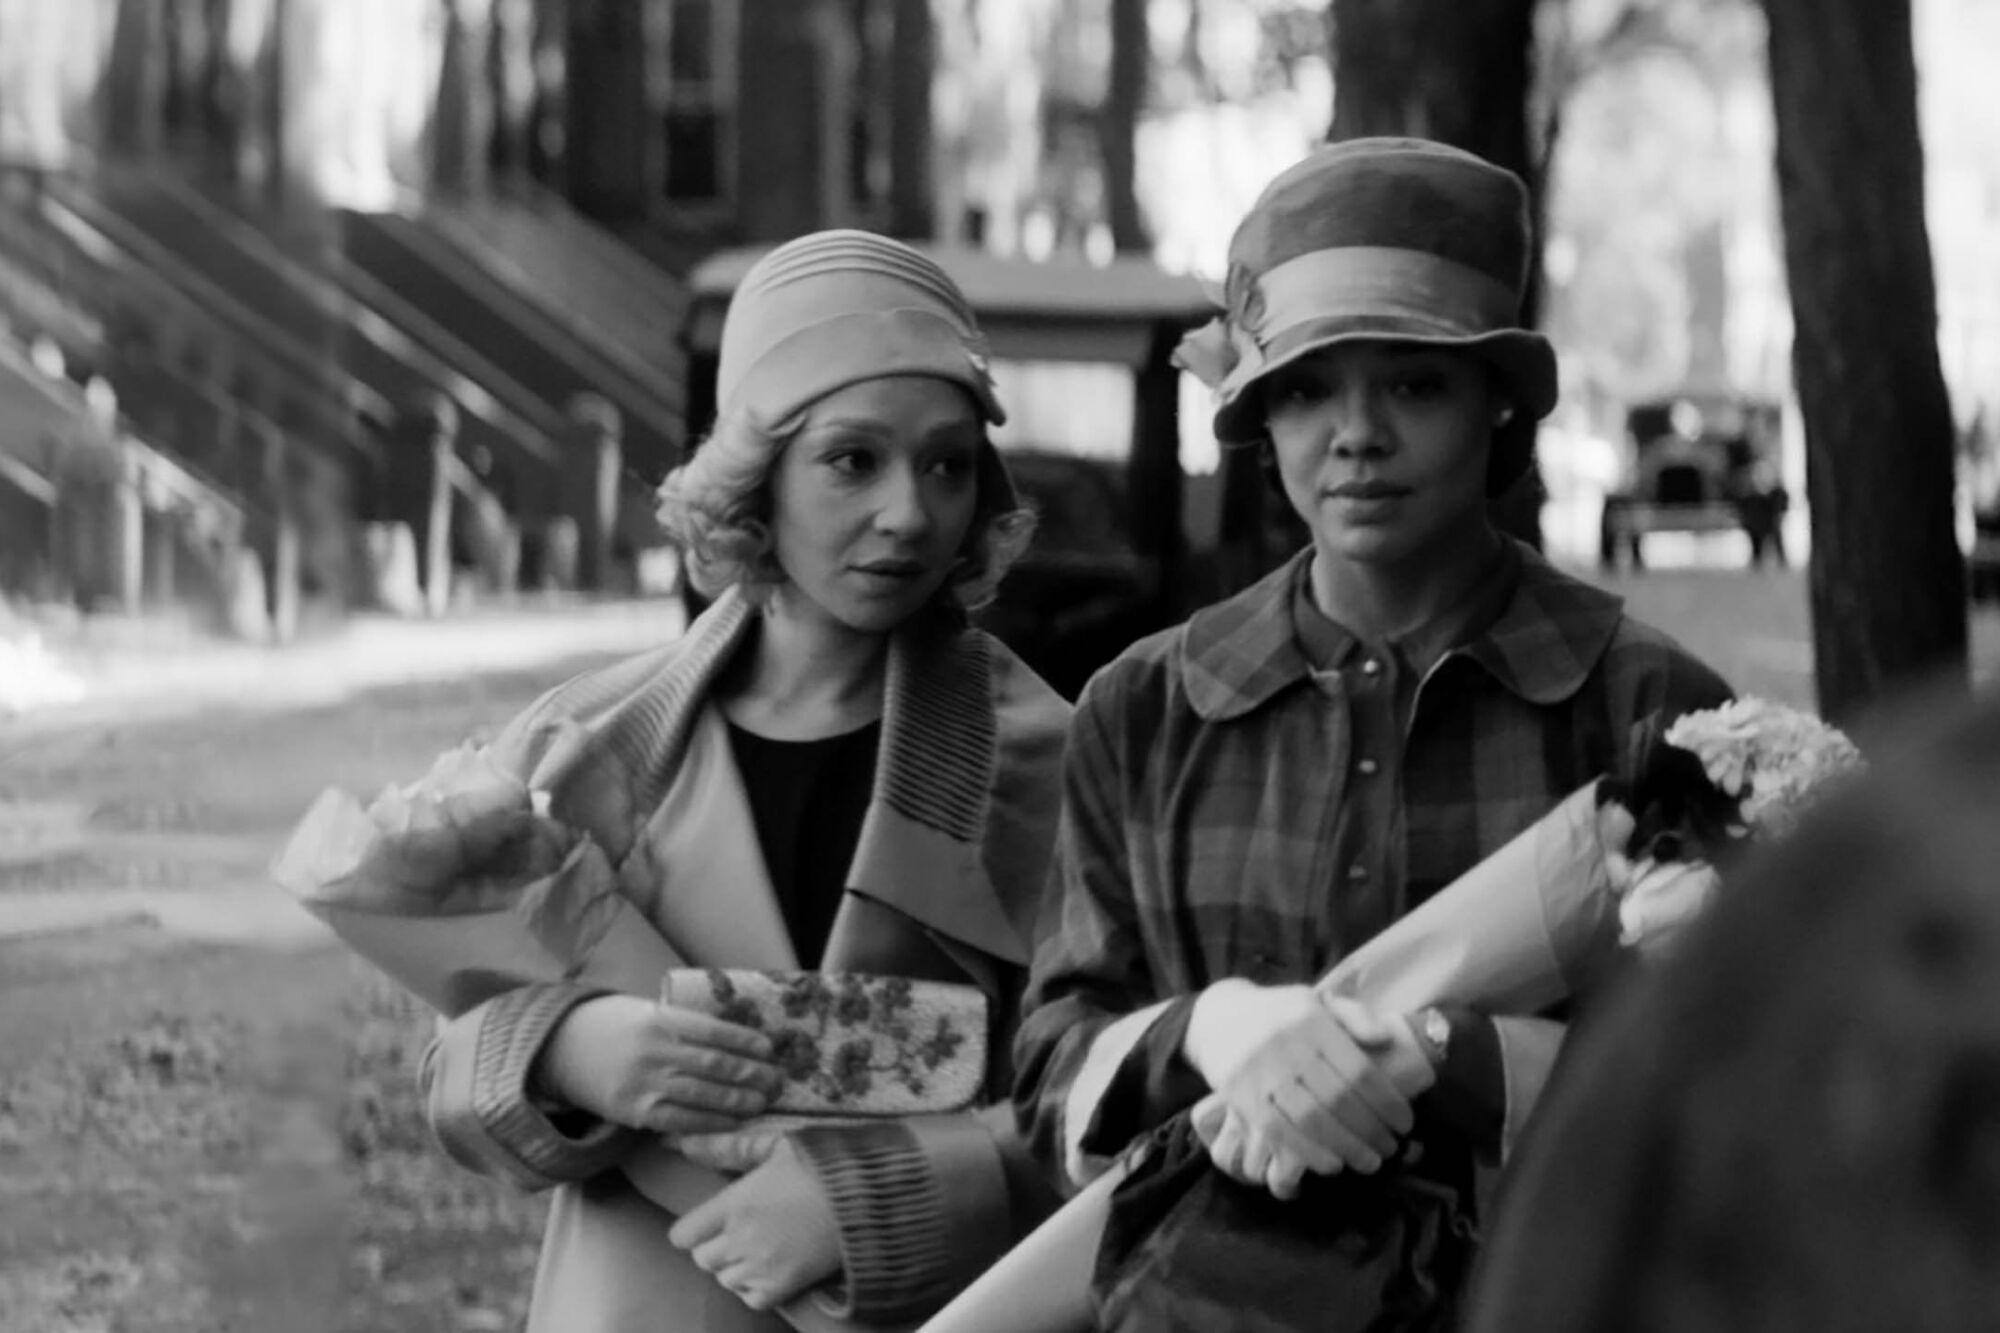 Ruth Negga and Tessa Thompson in a scene from "Passing" by Rebecca Hall